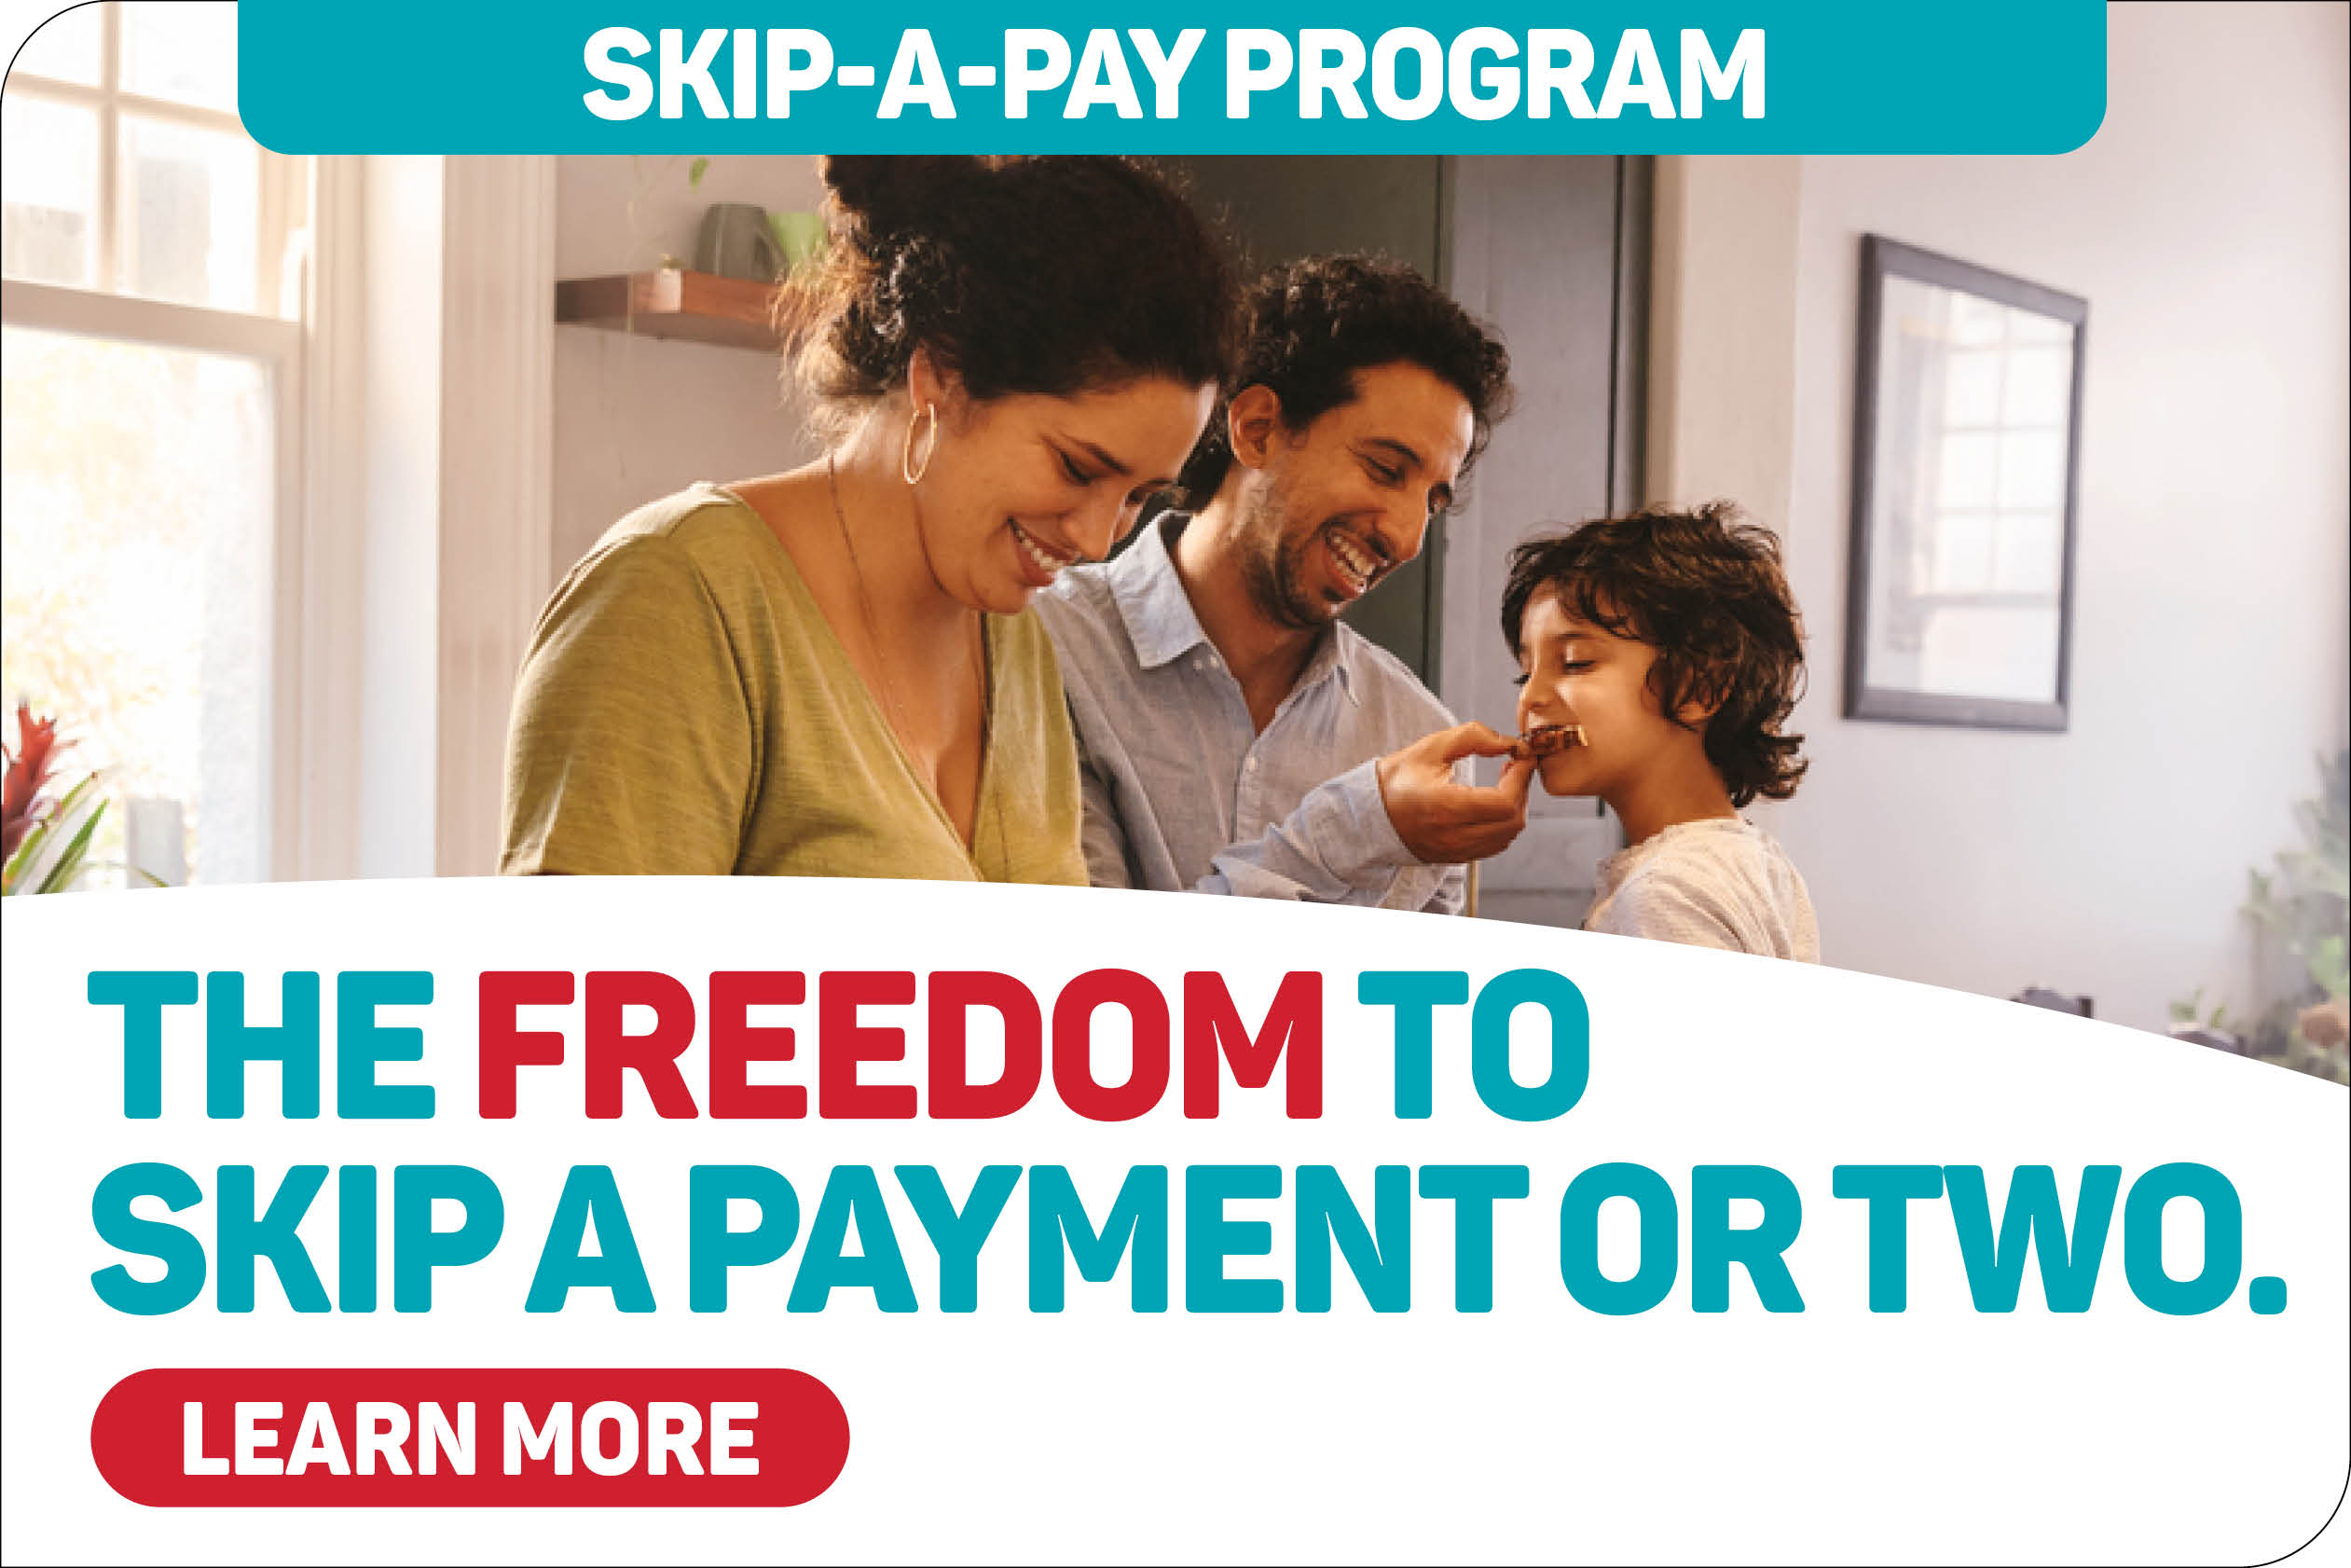 The freedom to skip a payment or two